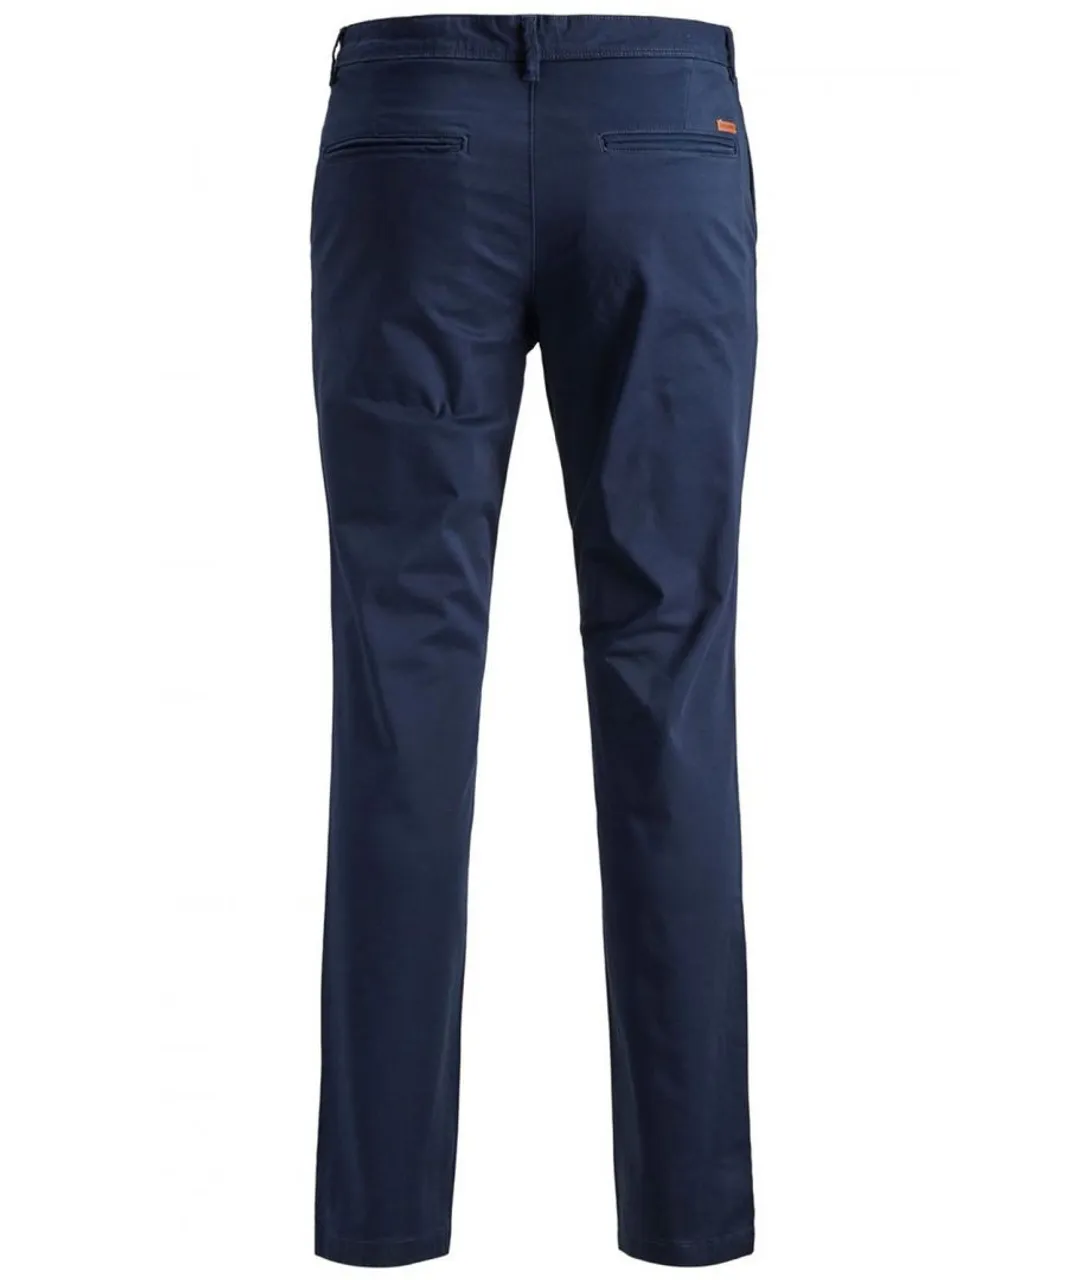 Jack & Jones Mens slim fit chinos with zip fastening and front and back pockets - Blue Cotton